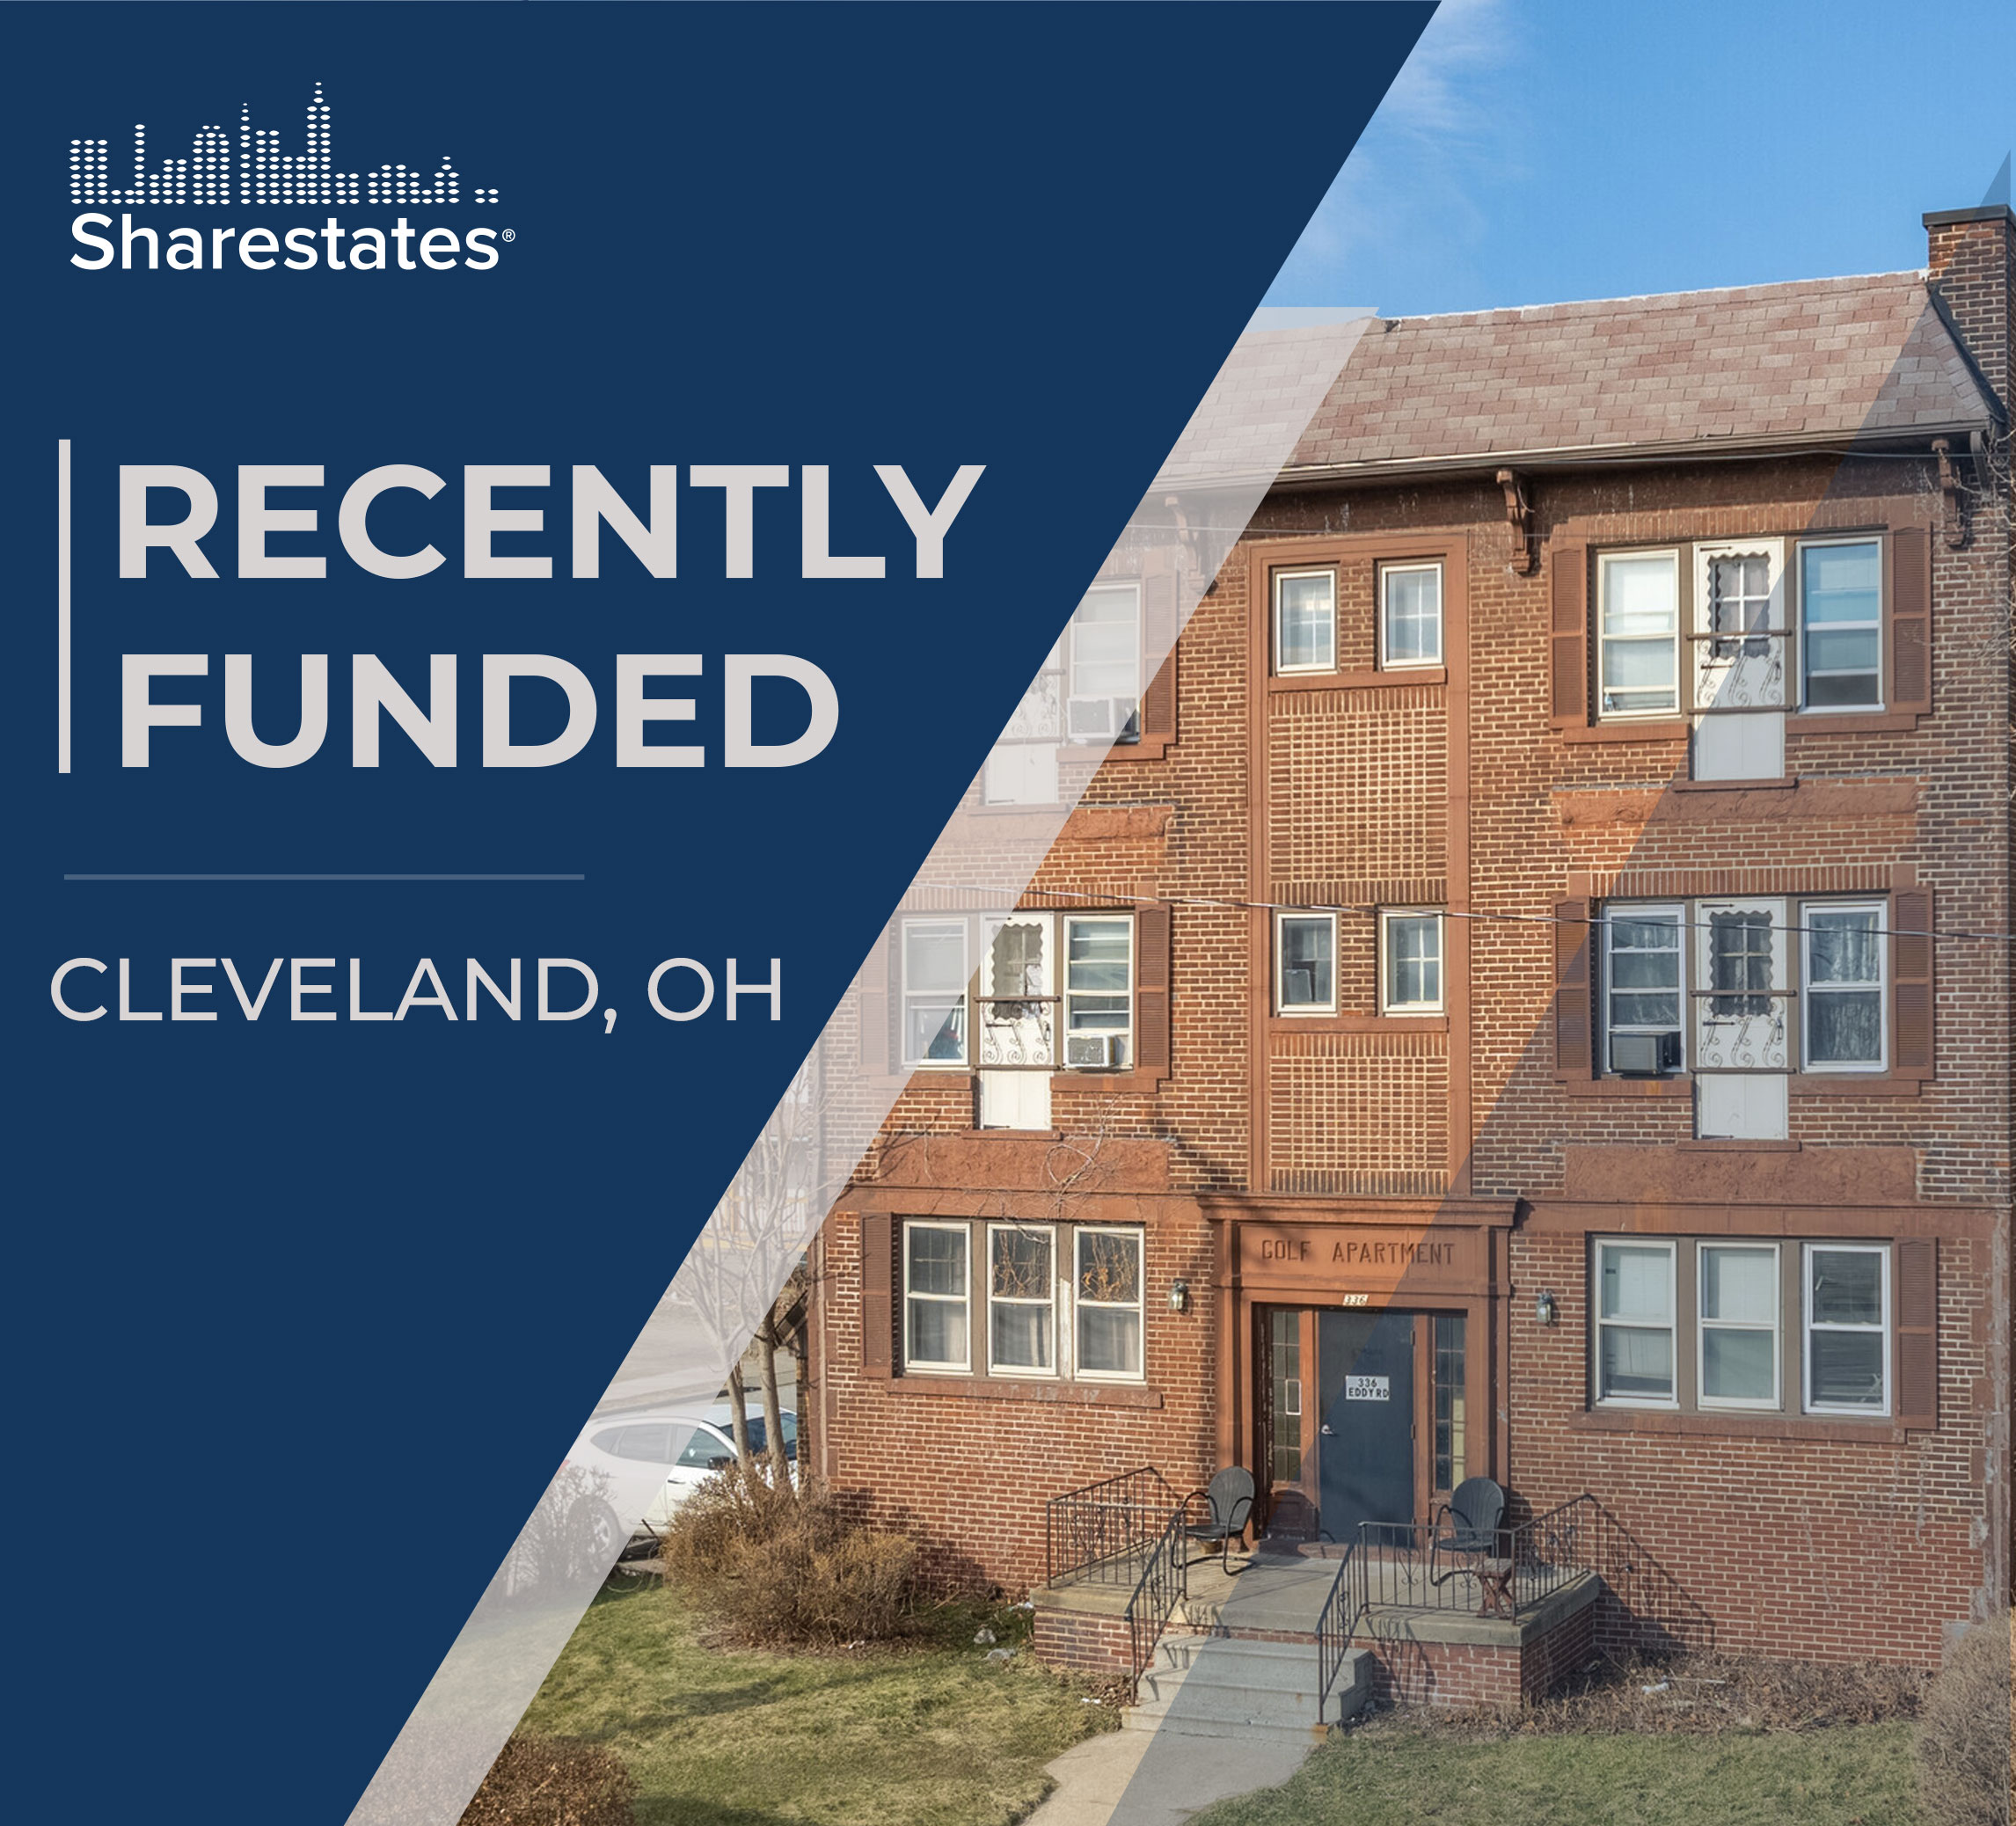 Recently Funded in Cleveland, OH